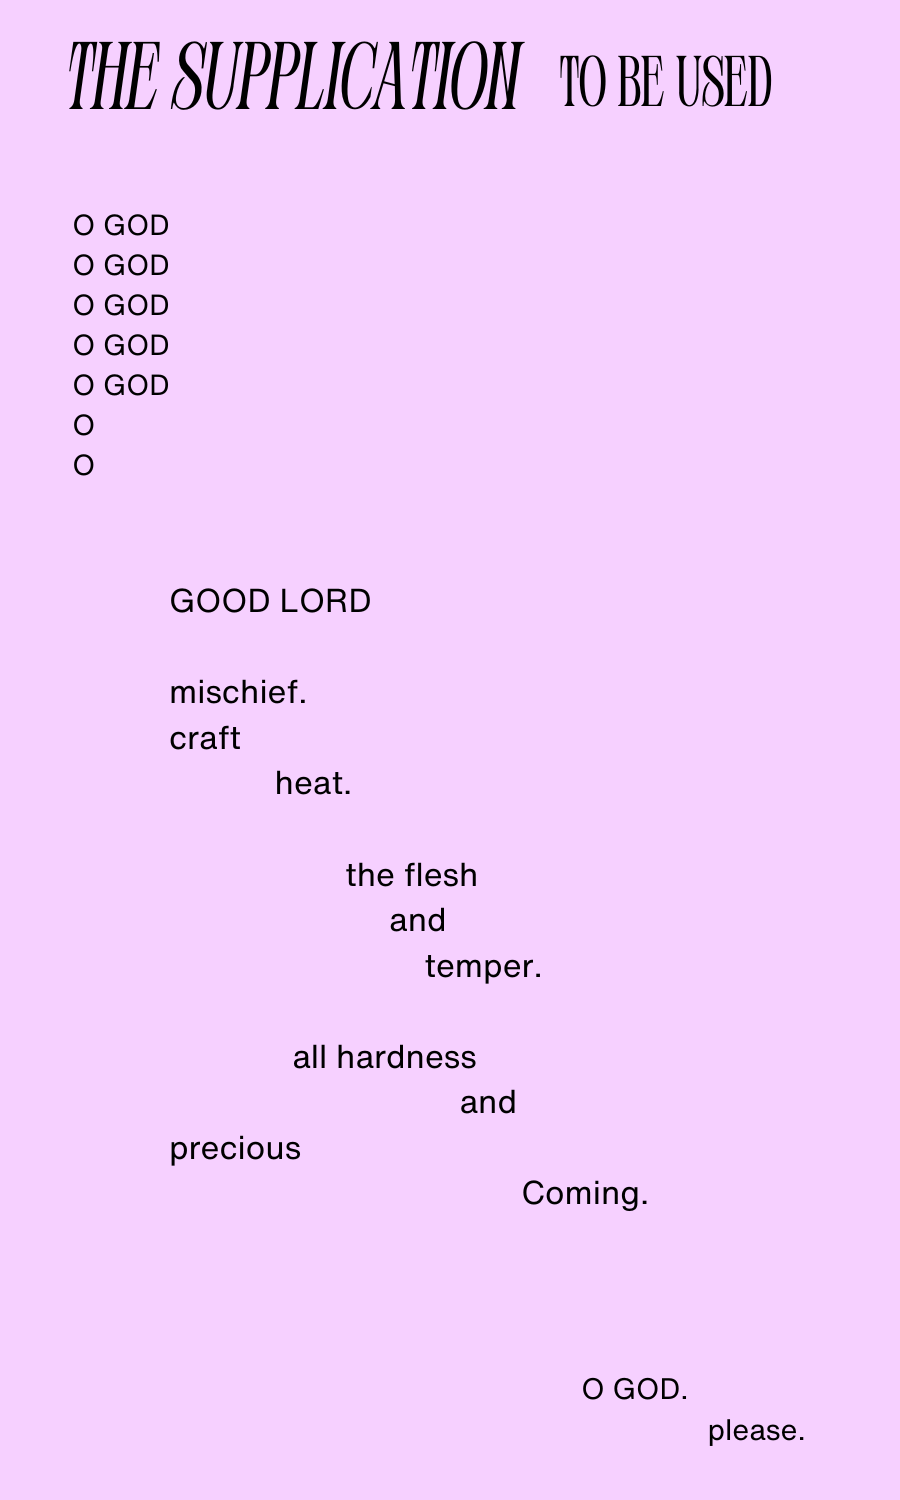 A poem entitled "The Supplication to be Used" The poem reads: O GOD O GOD O GOD O GOD O GOD O O O/ GOOD LORD/ mischief./ craft/ heat./ the flesh and temper./ all hardness and precious Coming/ O GOD./ please.